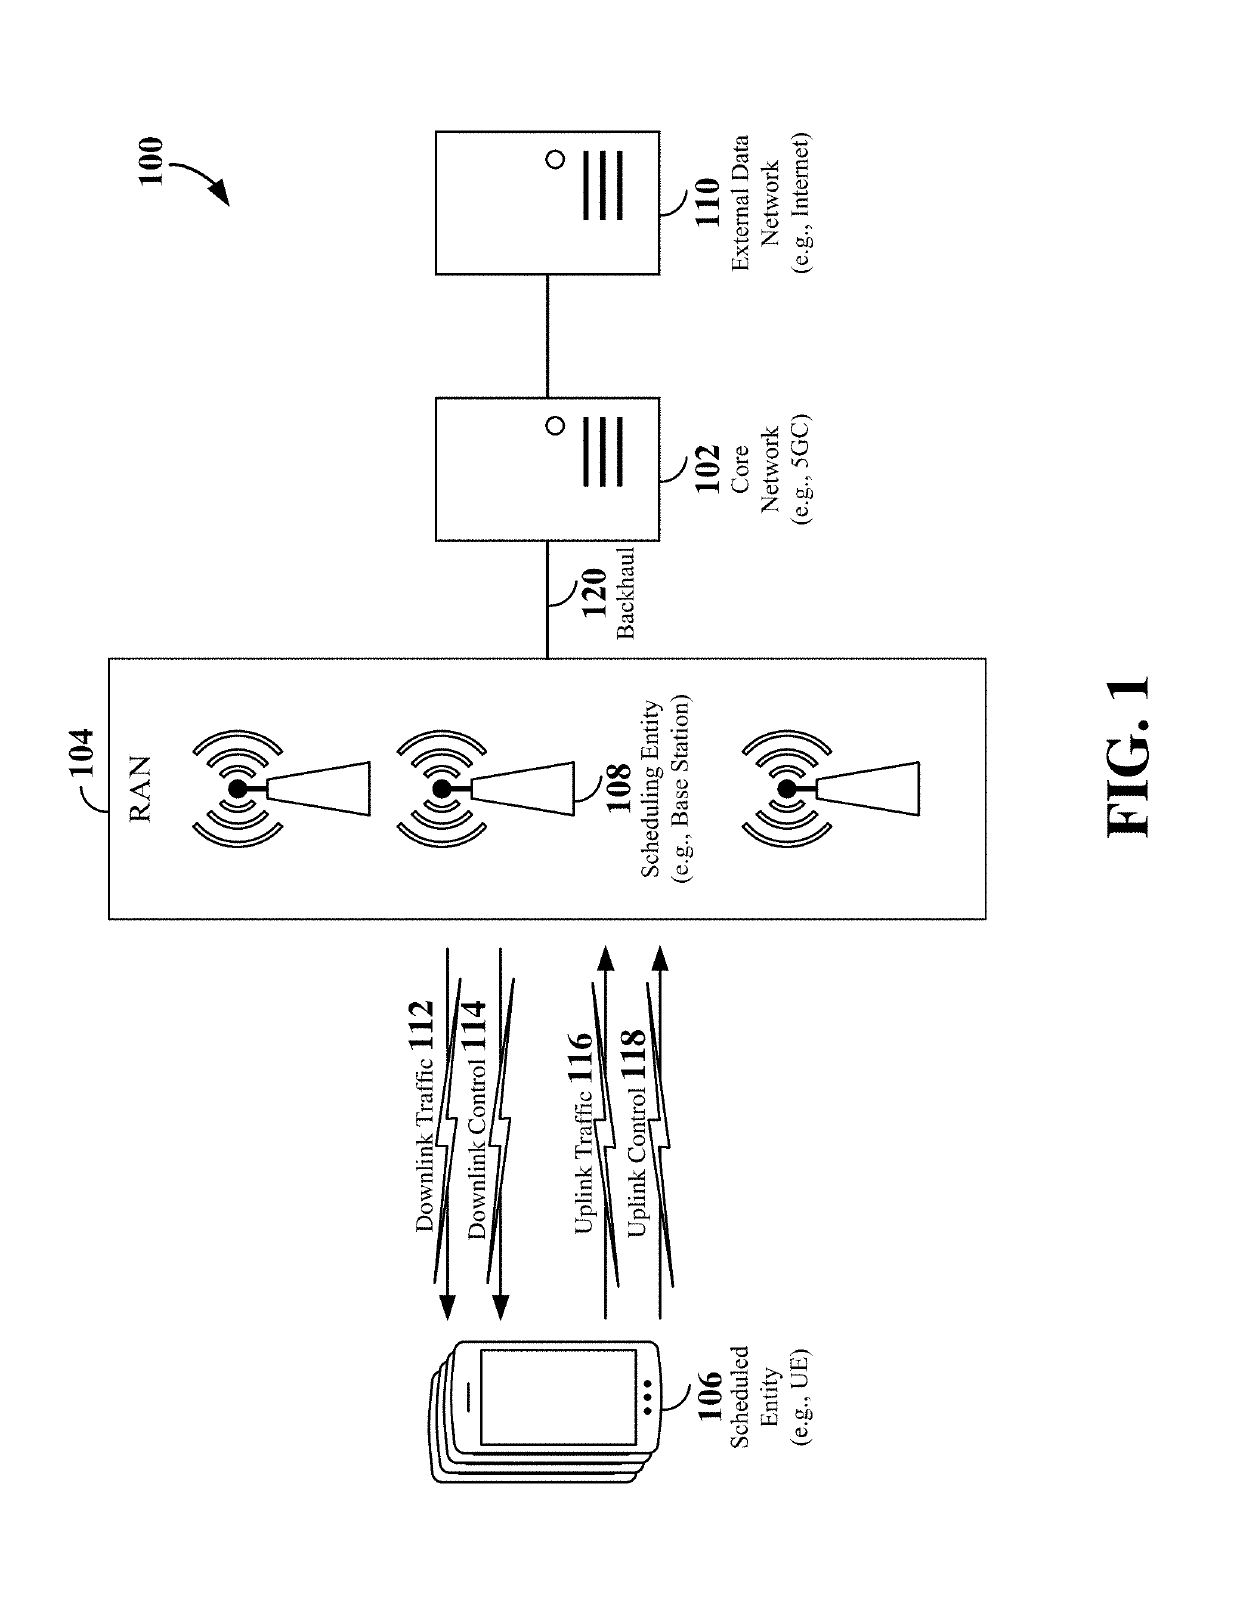 Facilitating quality of service flow remapping utilizing a service data adaptation protocol layer